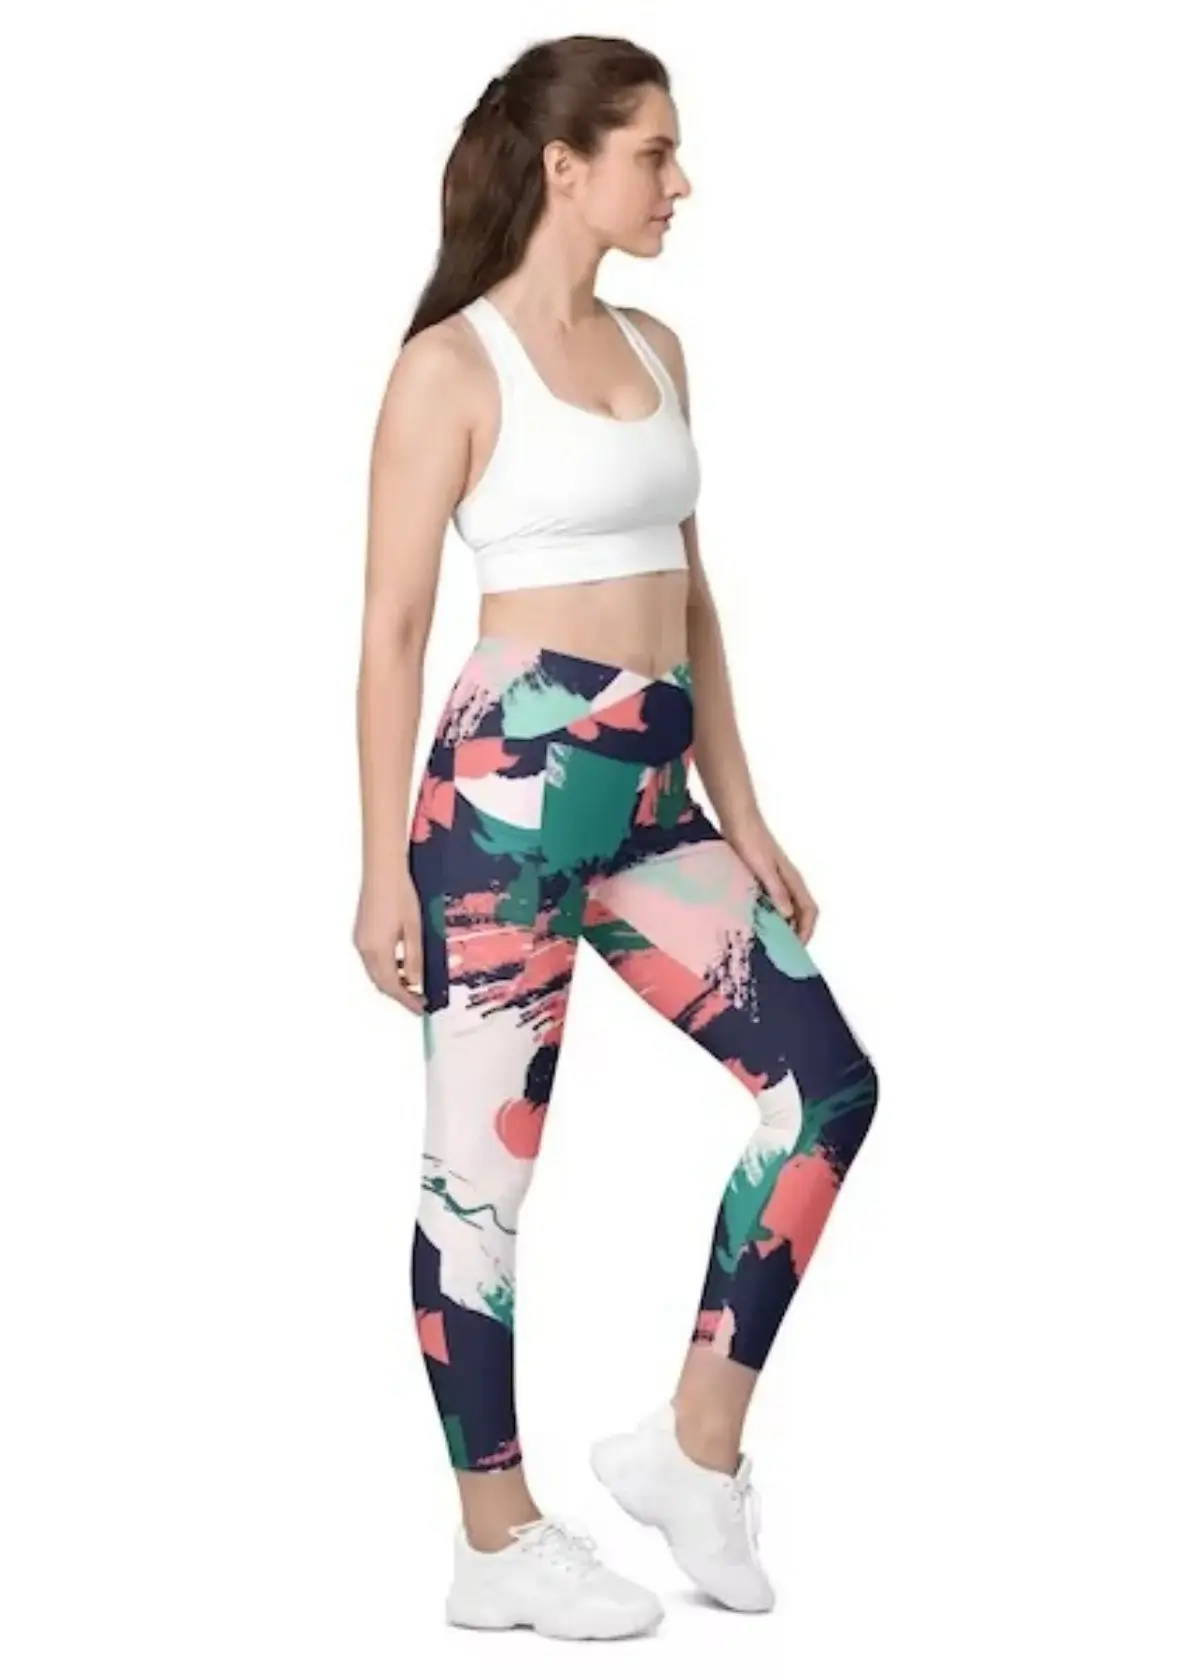 Can I find leggings with pockets in different sizes and lengths?